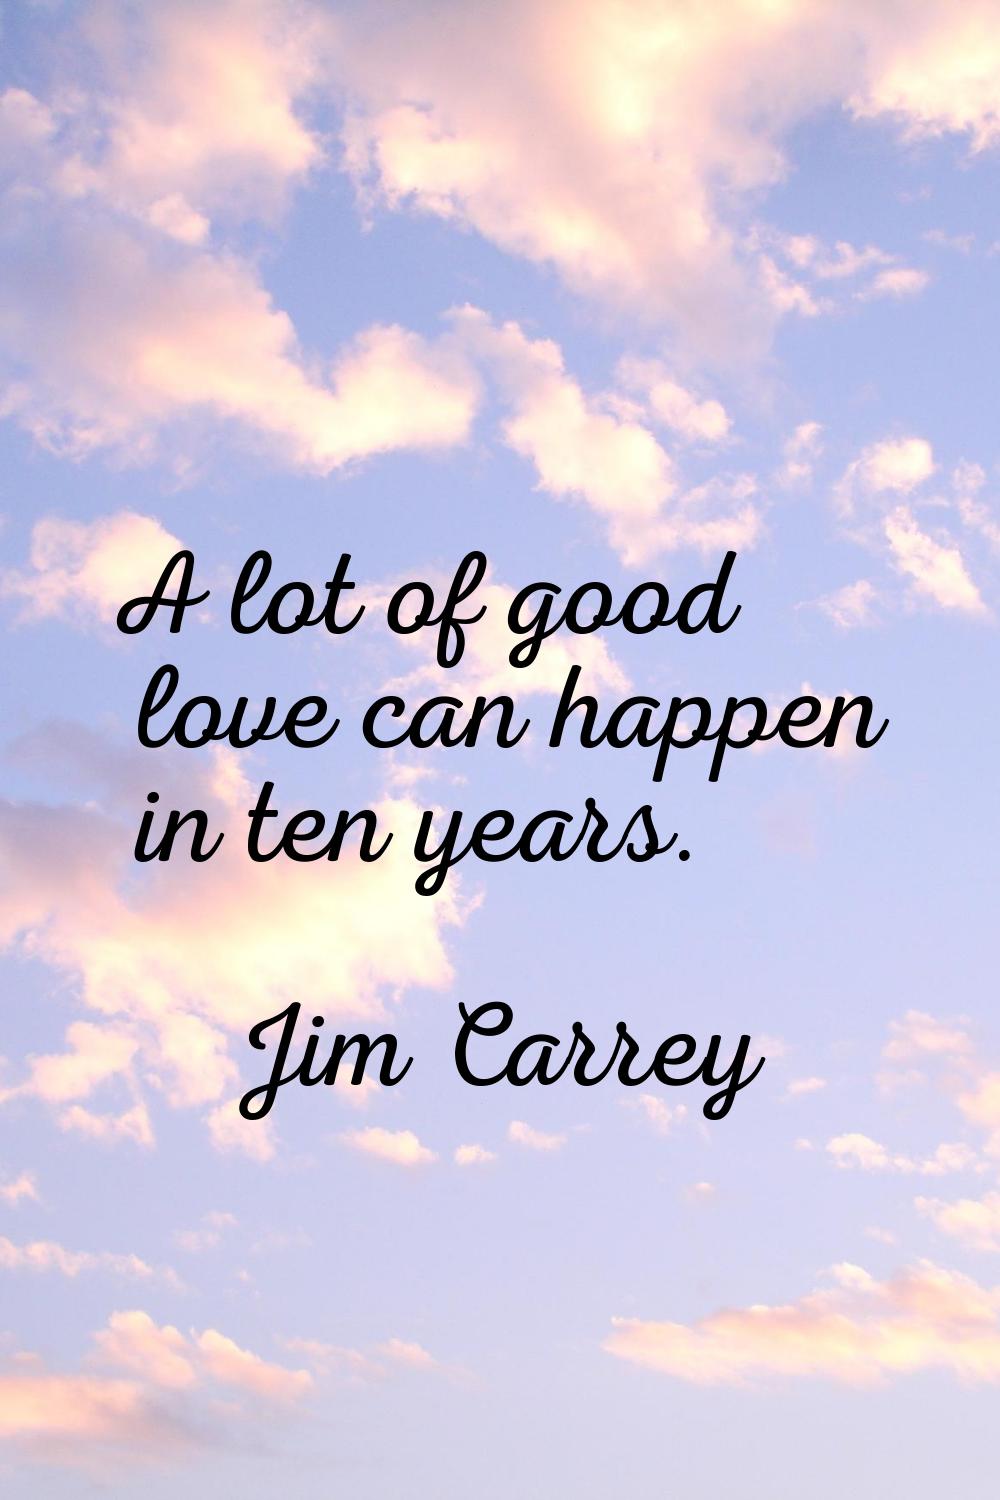 A lot of good love can happen in ten years.